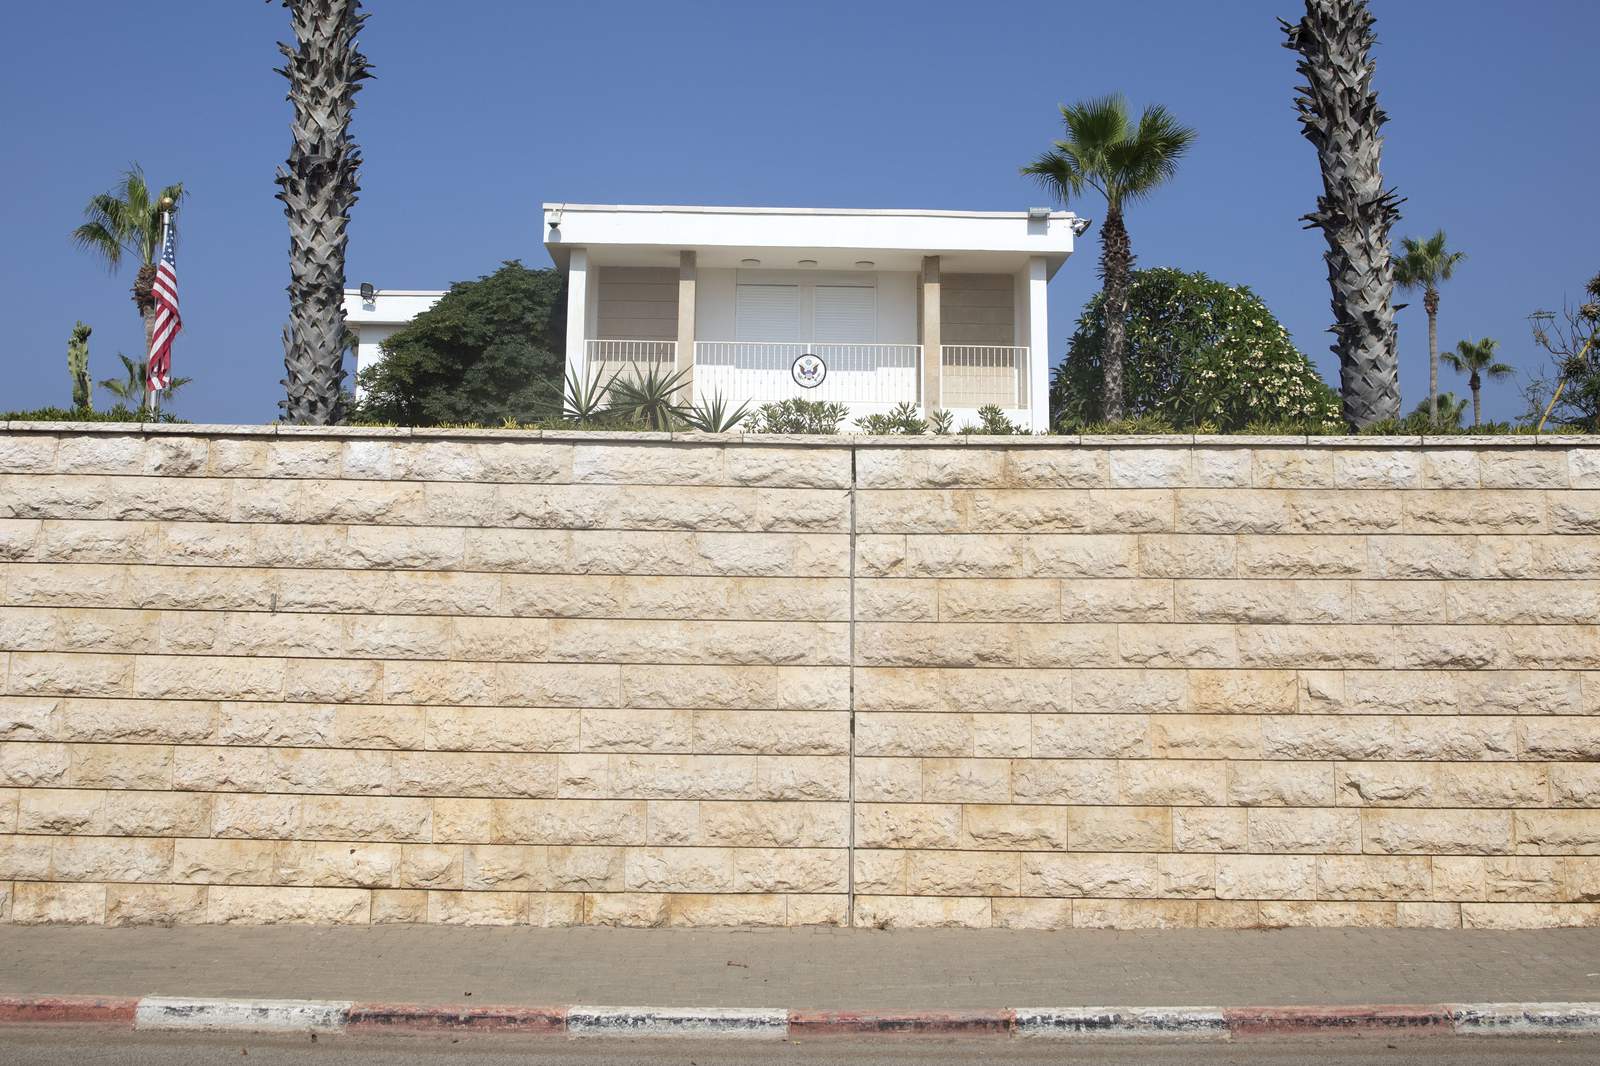 Record shows US sold ambassador's home in Israel for $67M